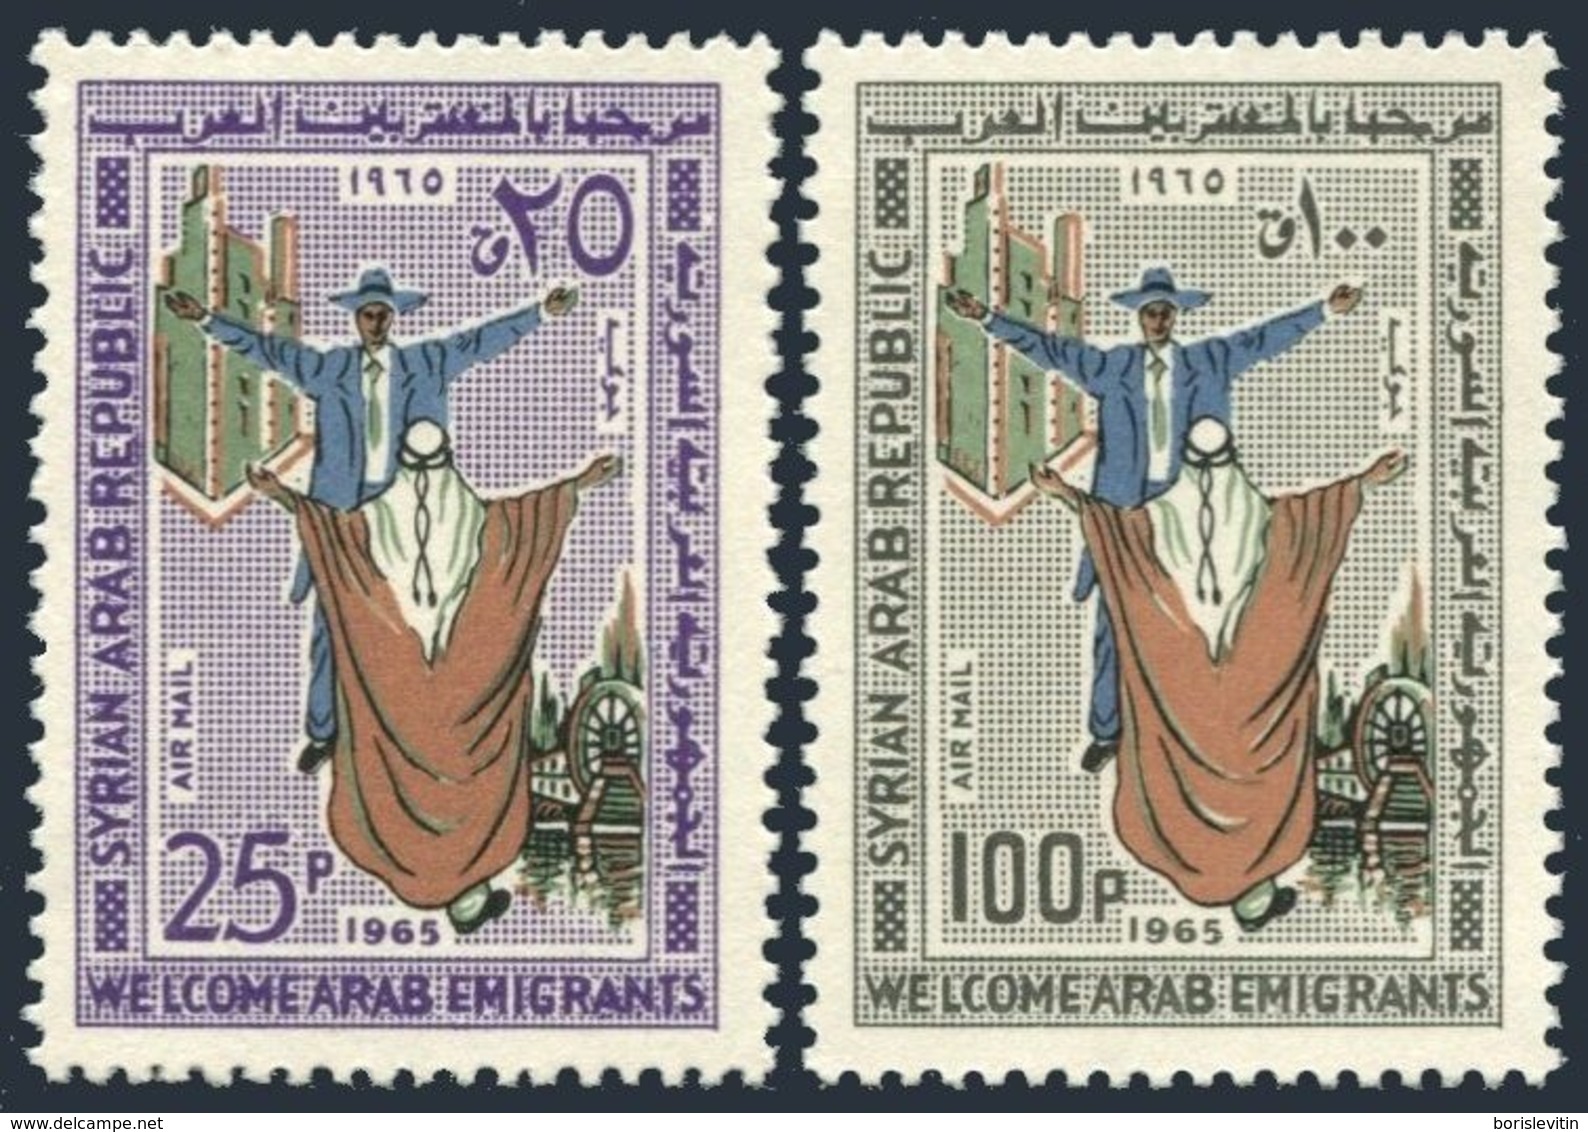 Syria C346-C347,MNH.Michel 915-916. To Welcome Arab Immigrants,1965. - Syrie